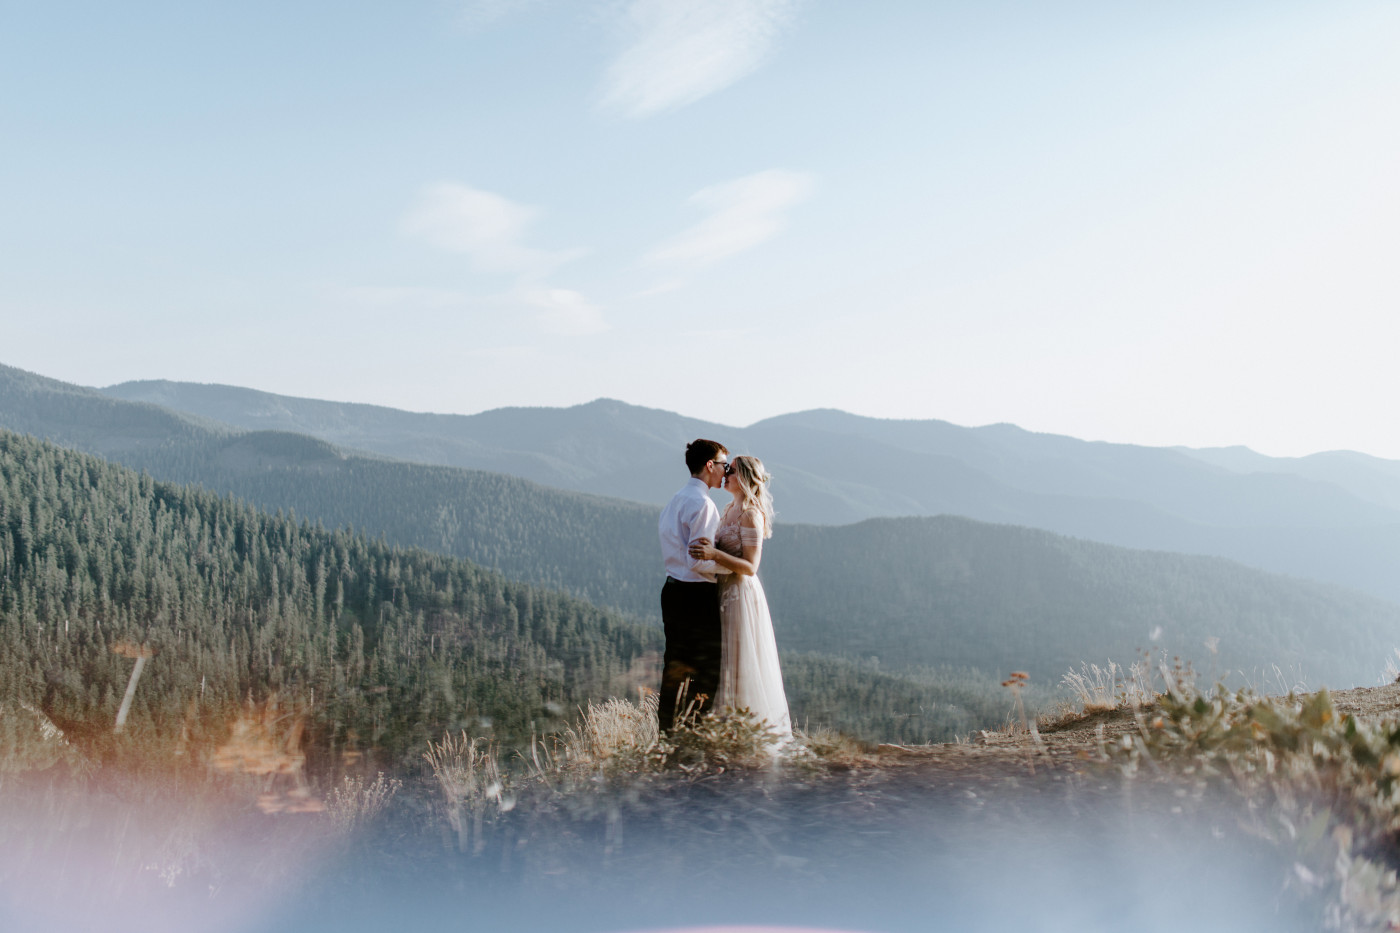 Kylie and Corey stand in the Mount Hood National Forest after their elopement.